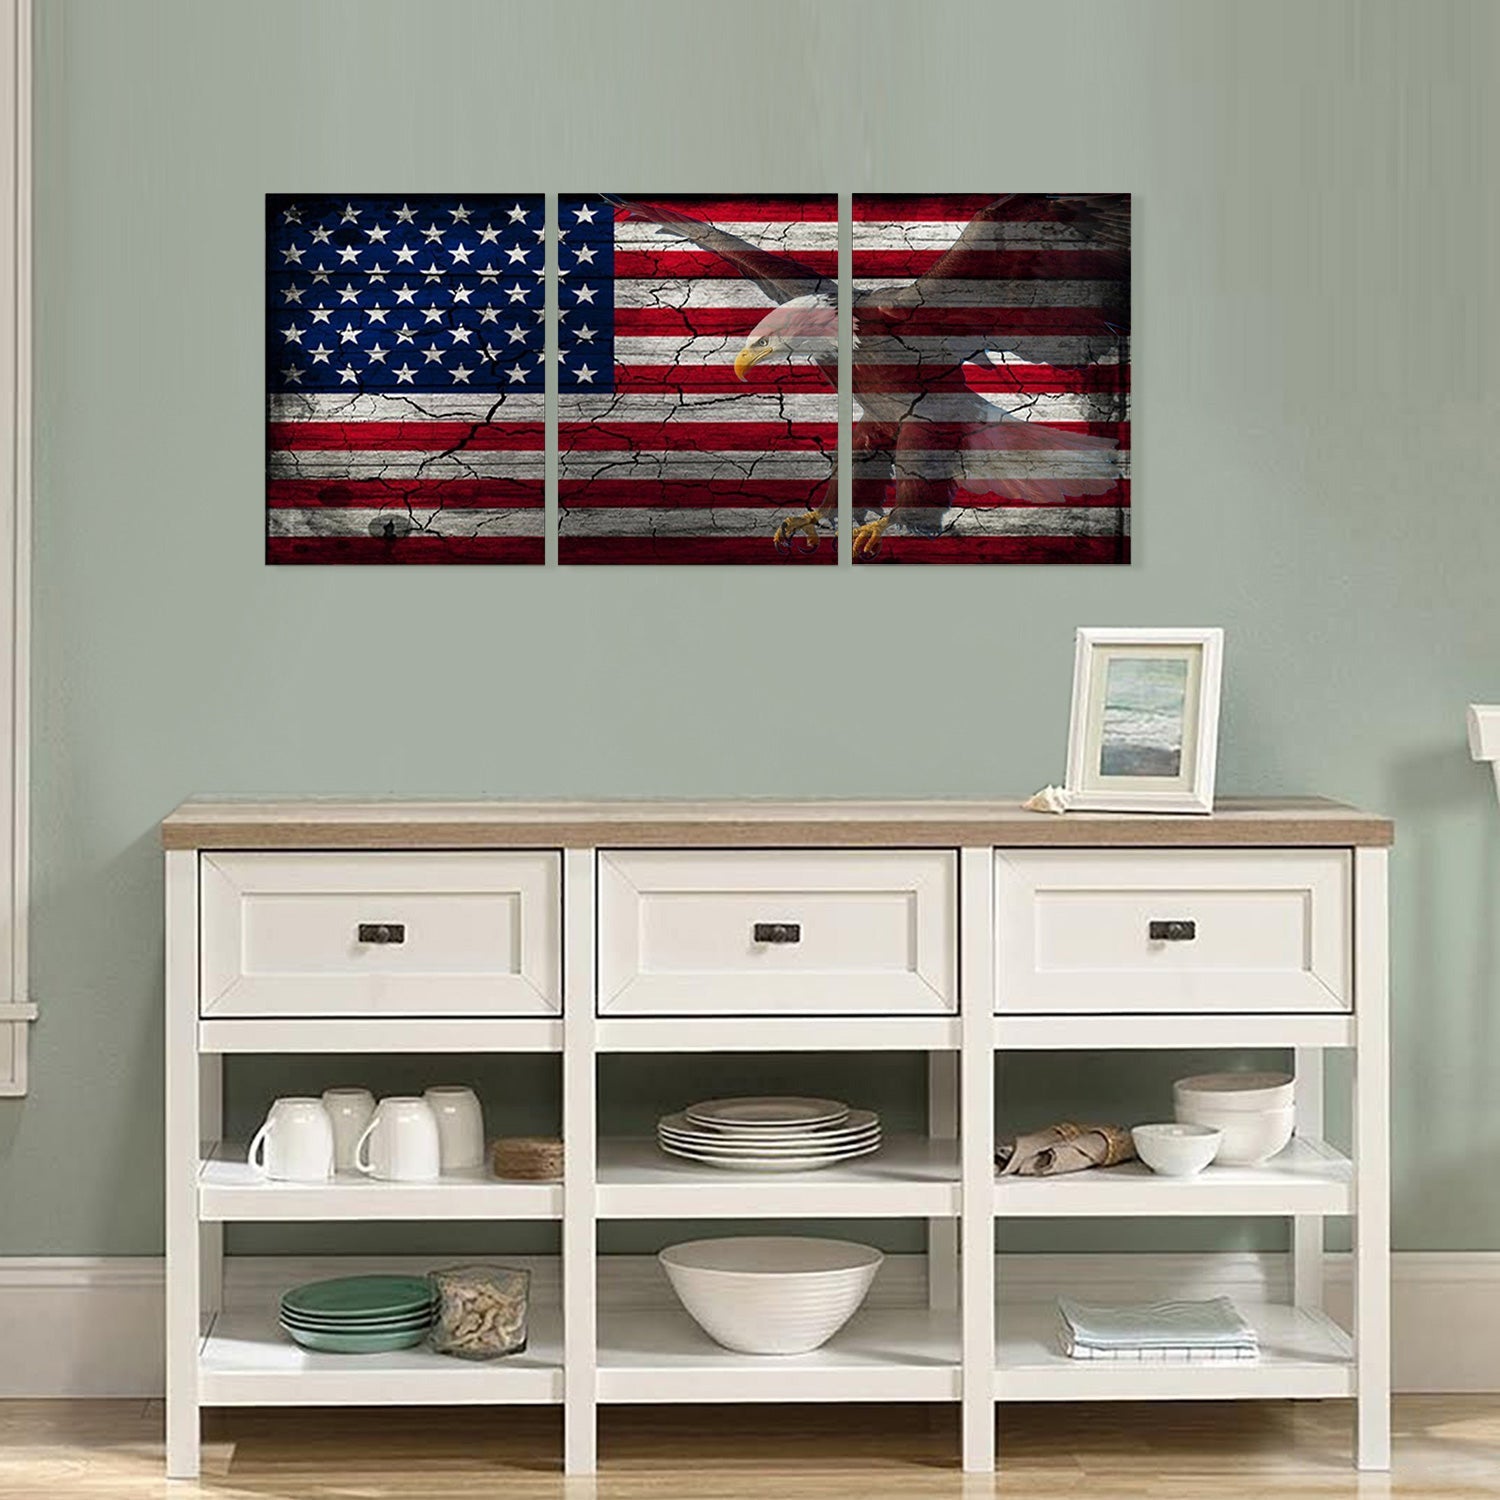 American Eagle American Flag Canvas Wall Art Framed Modern Wall Decor Decorative Accents For Wall Ready to Hang for Home Living Room Bedroom Entryway Each Panel Size 12” x 16” (3pc set) - LifeSong Milestones